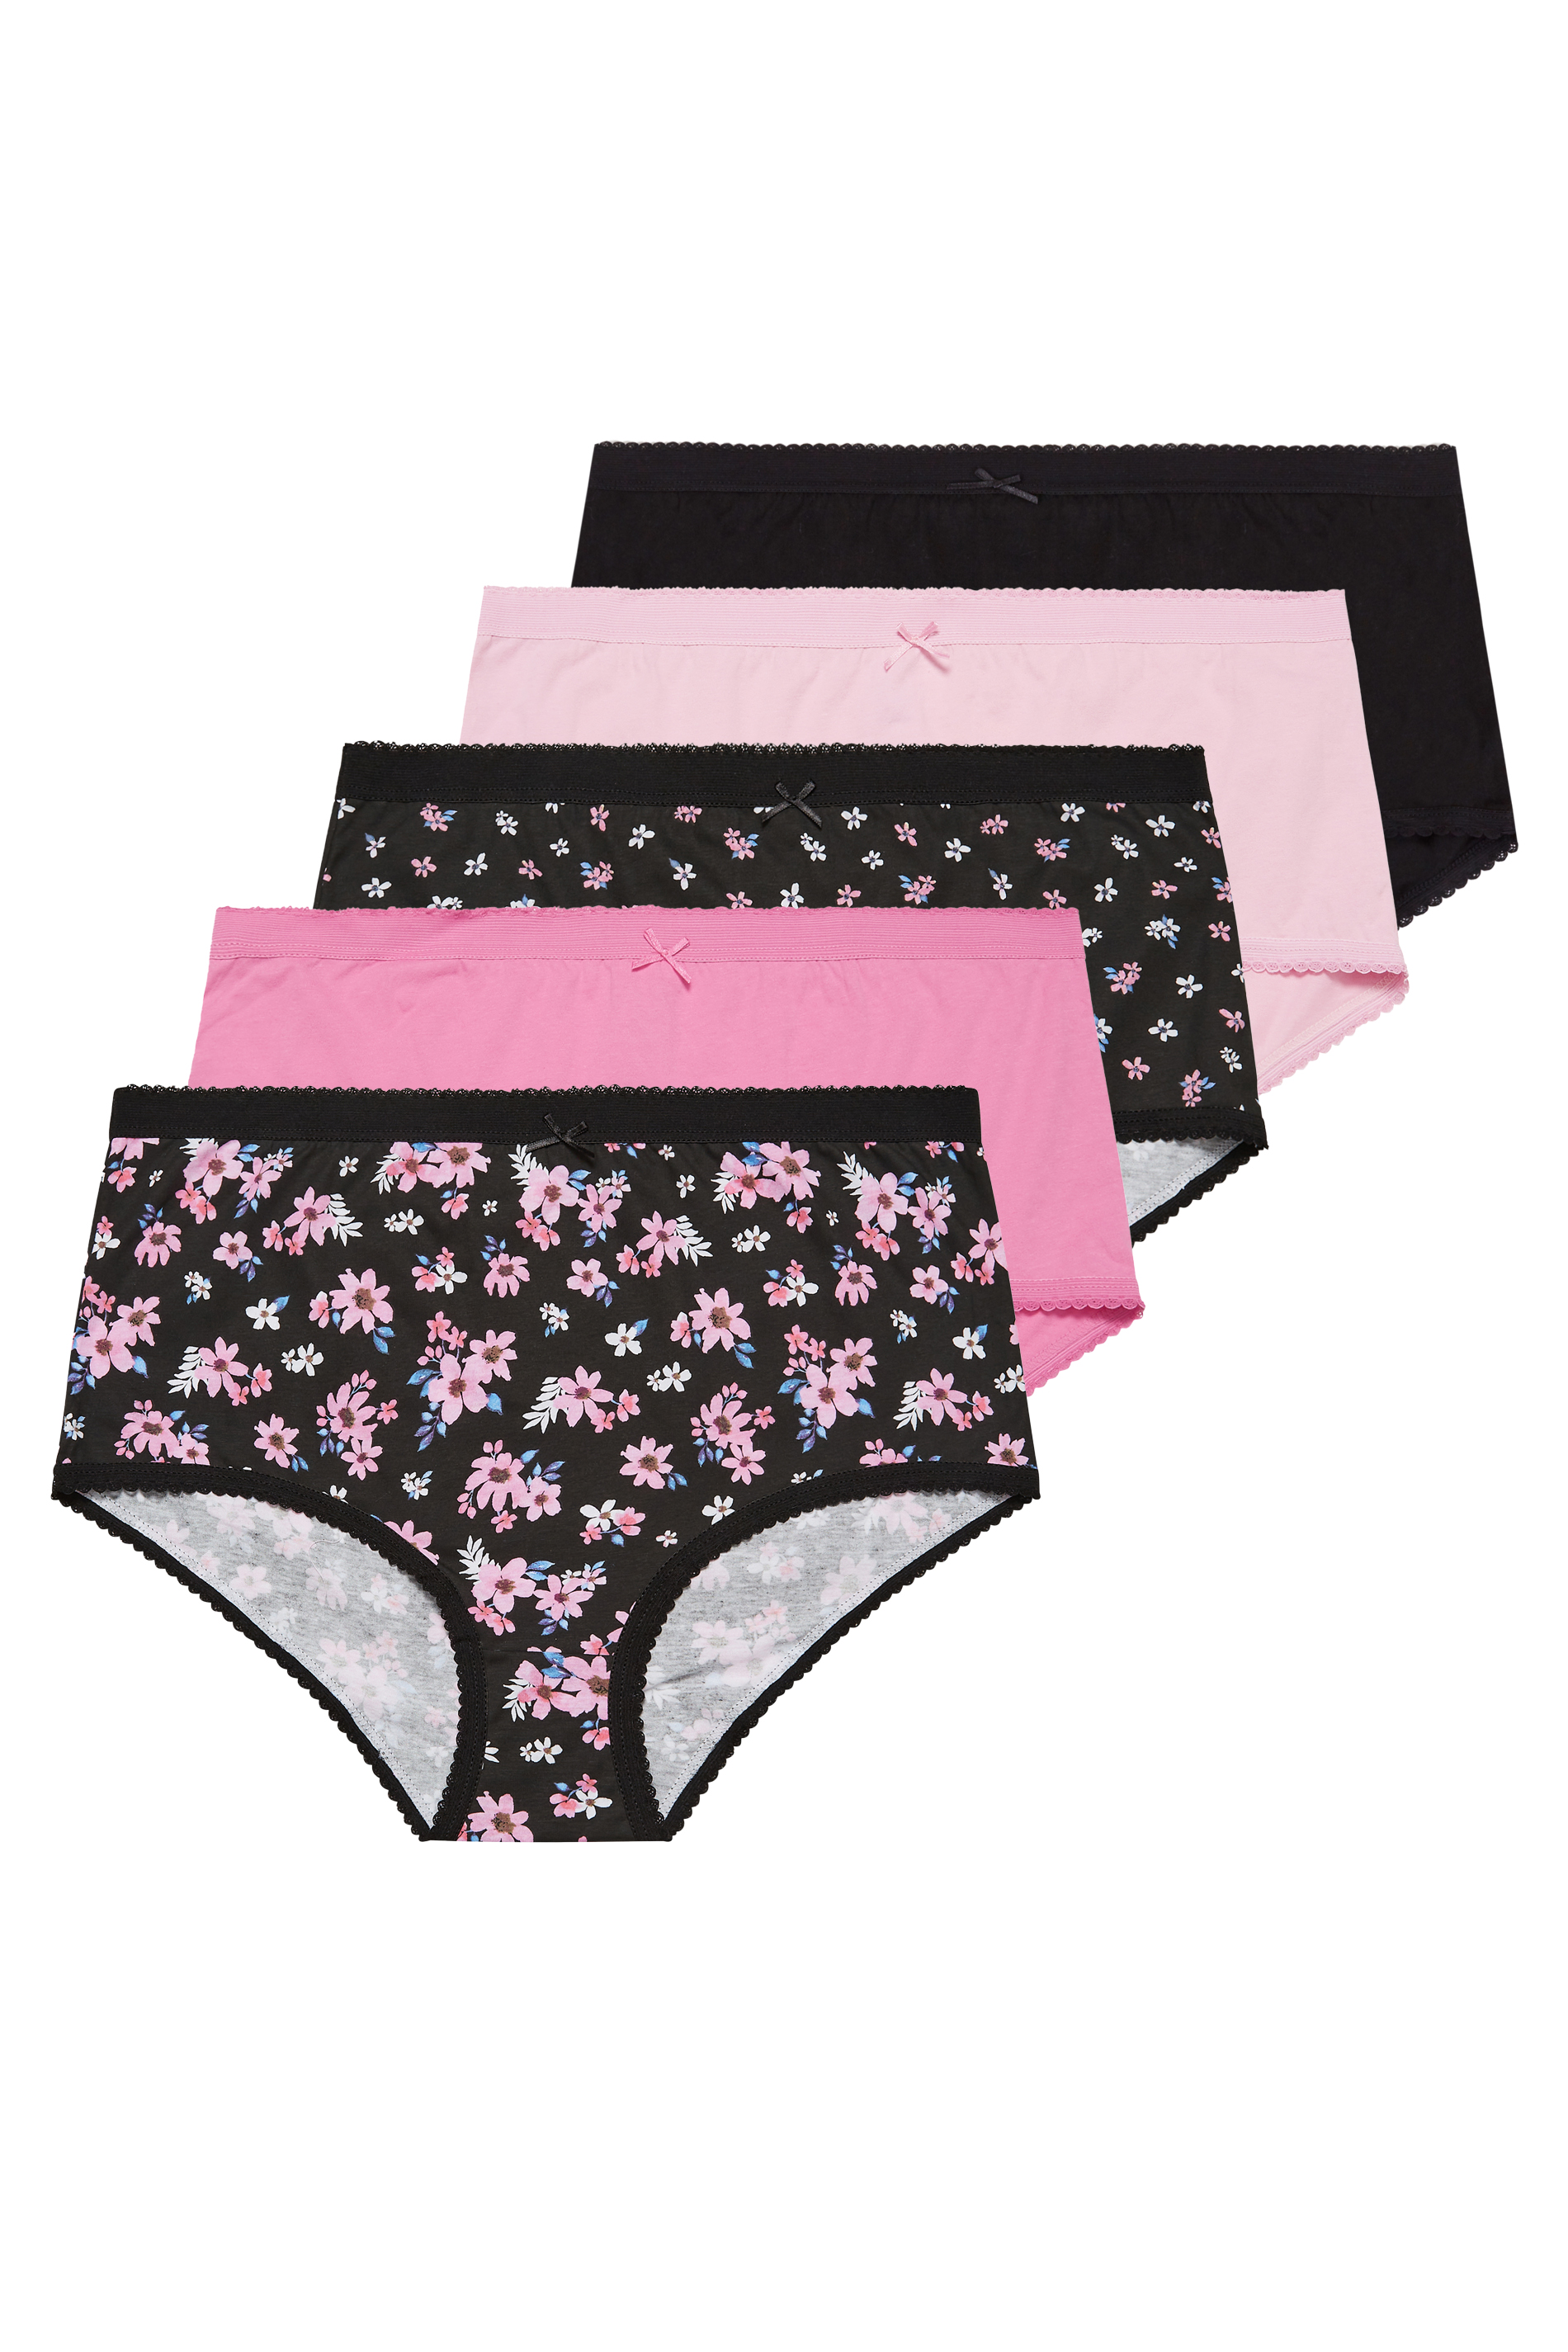 YOURS Curve Plus Size 5 PACK Black & Pink Floral Full Briefs | Yours Clothing  3